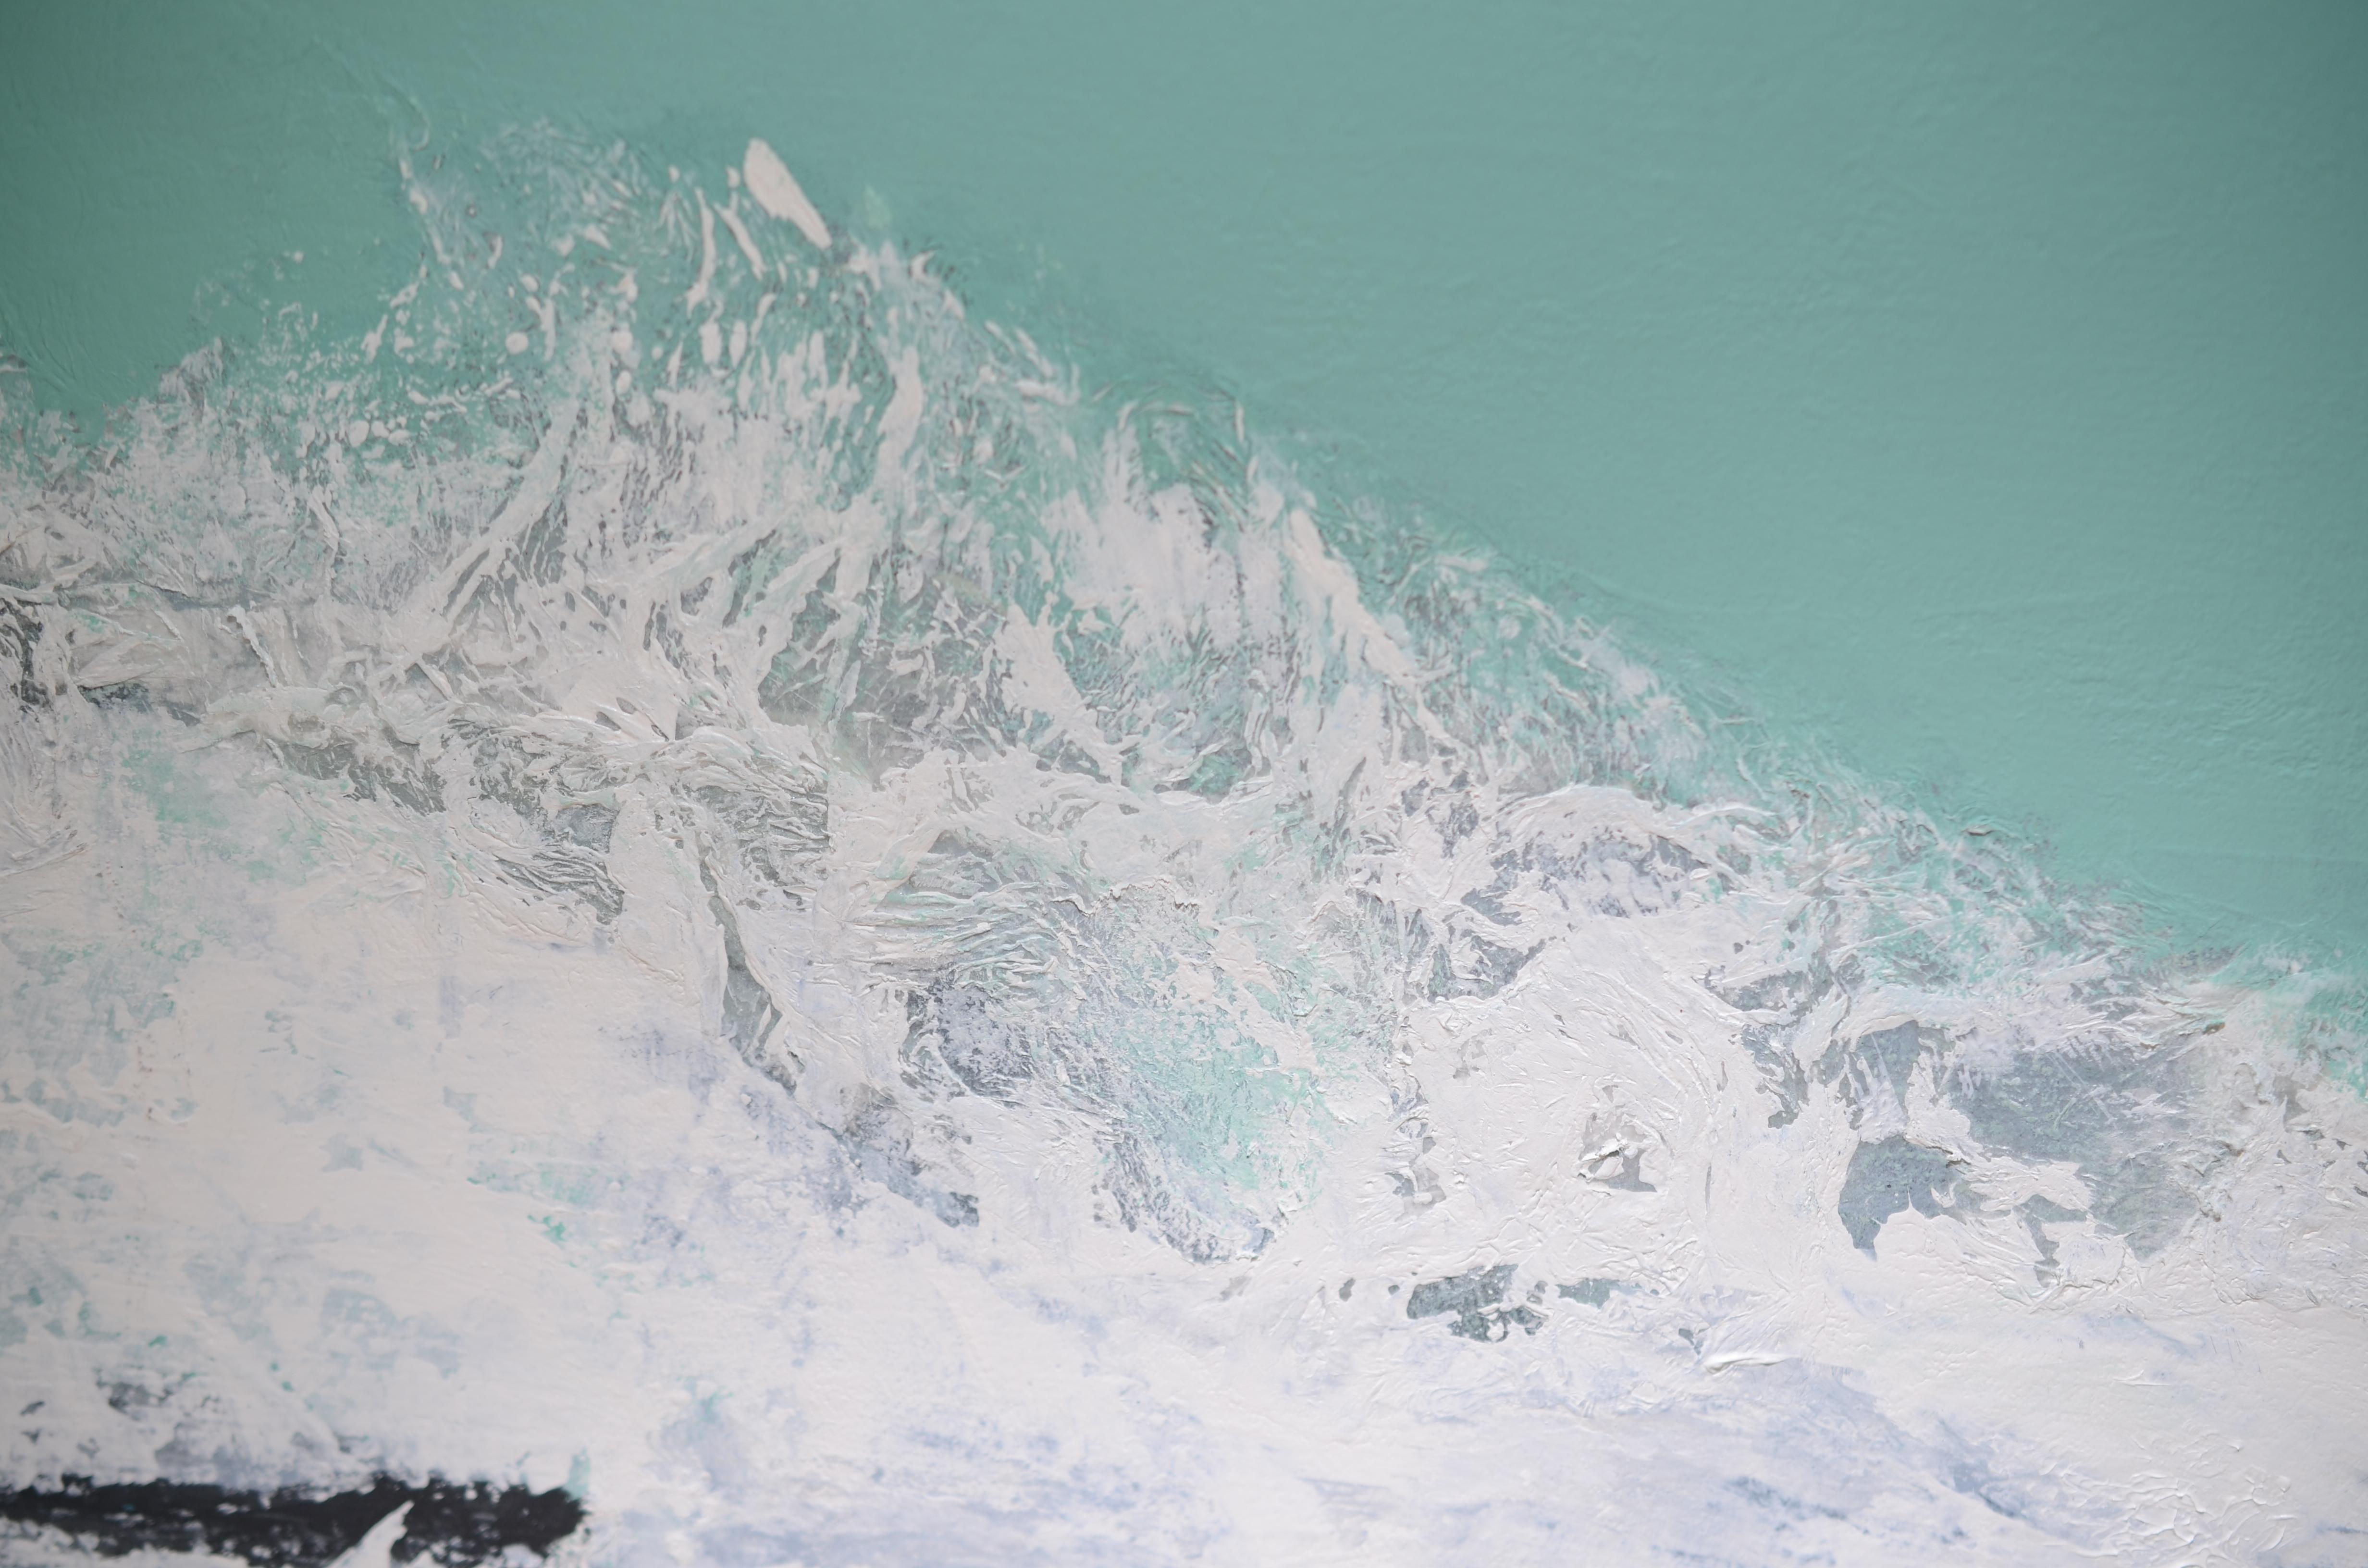  A minimalist abstract marine landscape, this white & black on turquoise acrylic painting on canvas is by Francoise Duprat.

Most of Françoise Duprat's works of the 21st century are inspired by the sea of the Gulf of Morbihan, and although this is